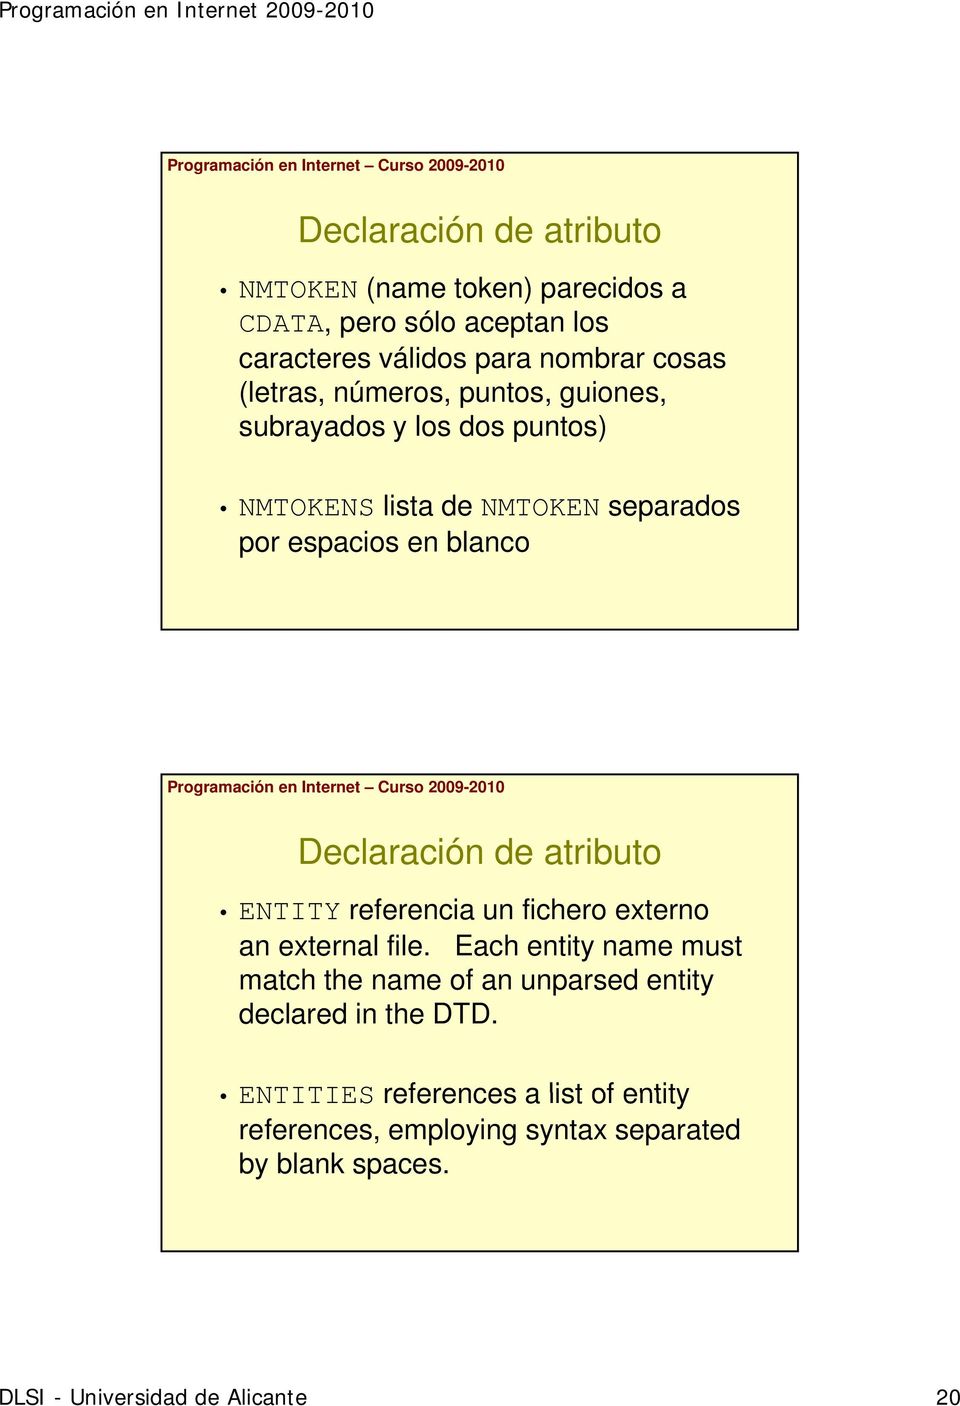 referencia un fichero externo an external file. Each entity name must match the name of an unparsed entity declared in the DTD.